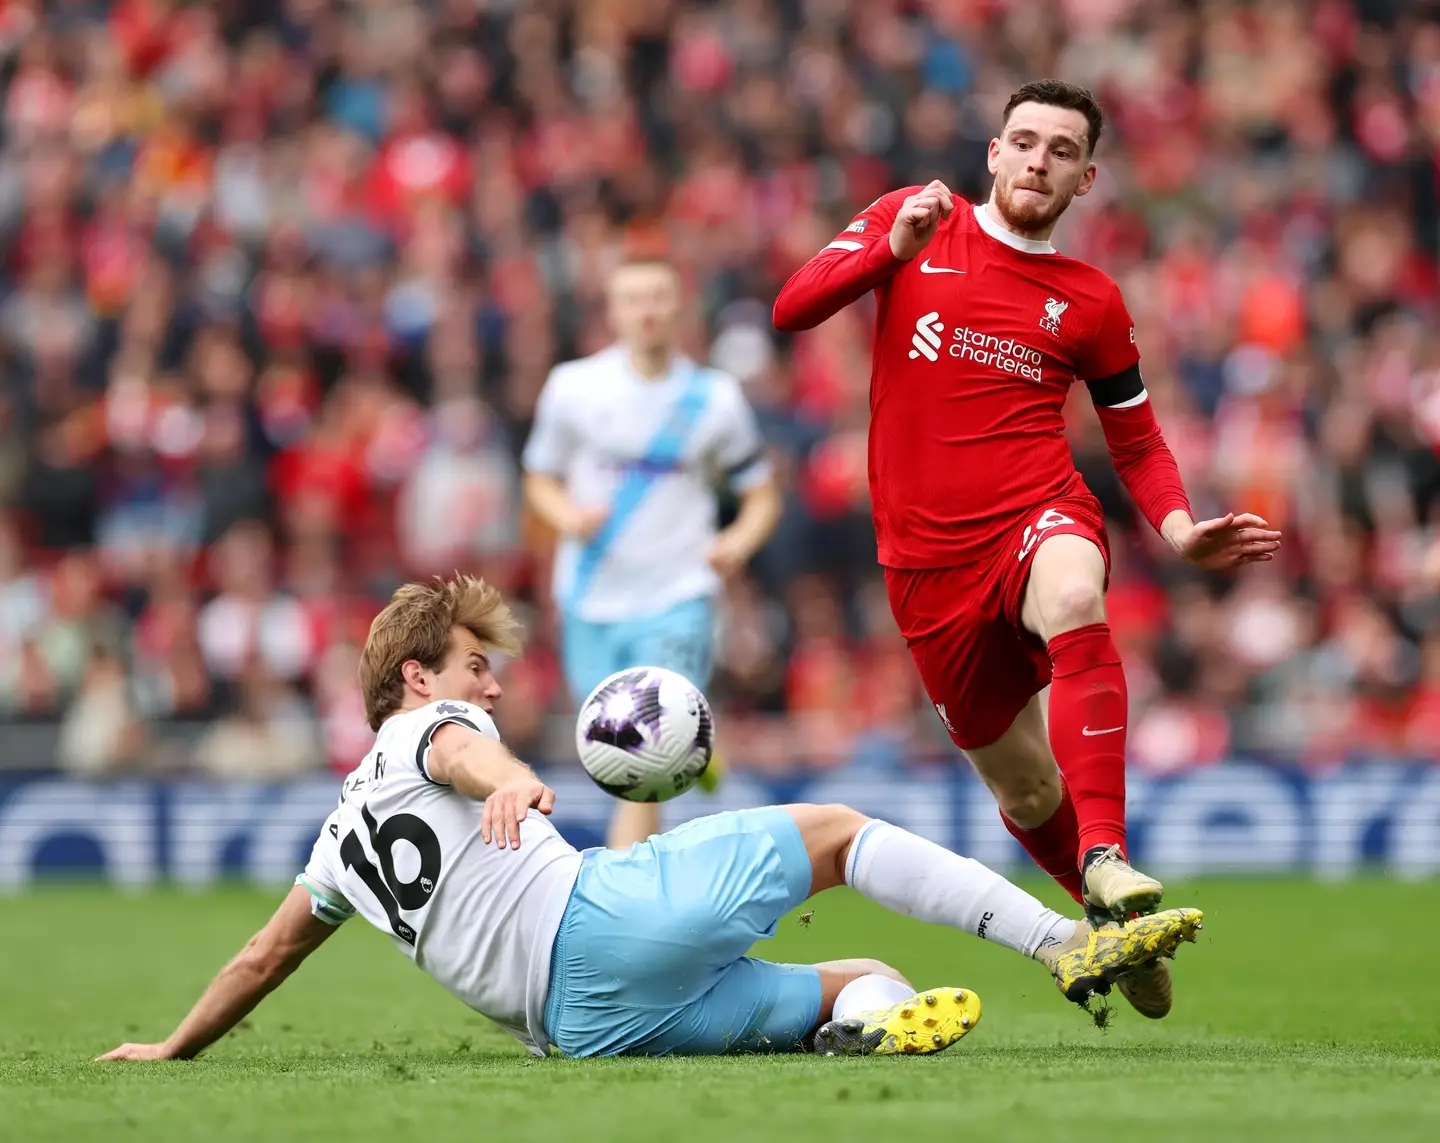 Robertson insisted Liverpool's attackers had to do better (Getty)